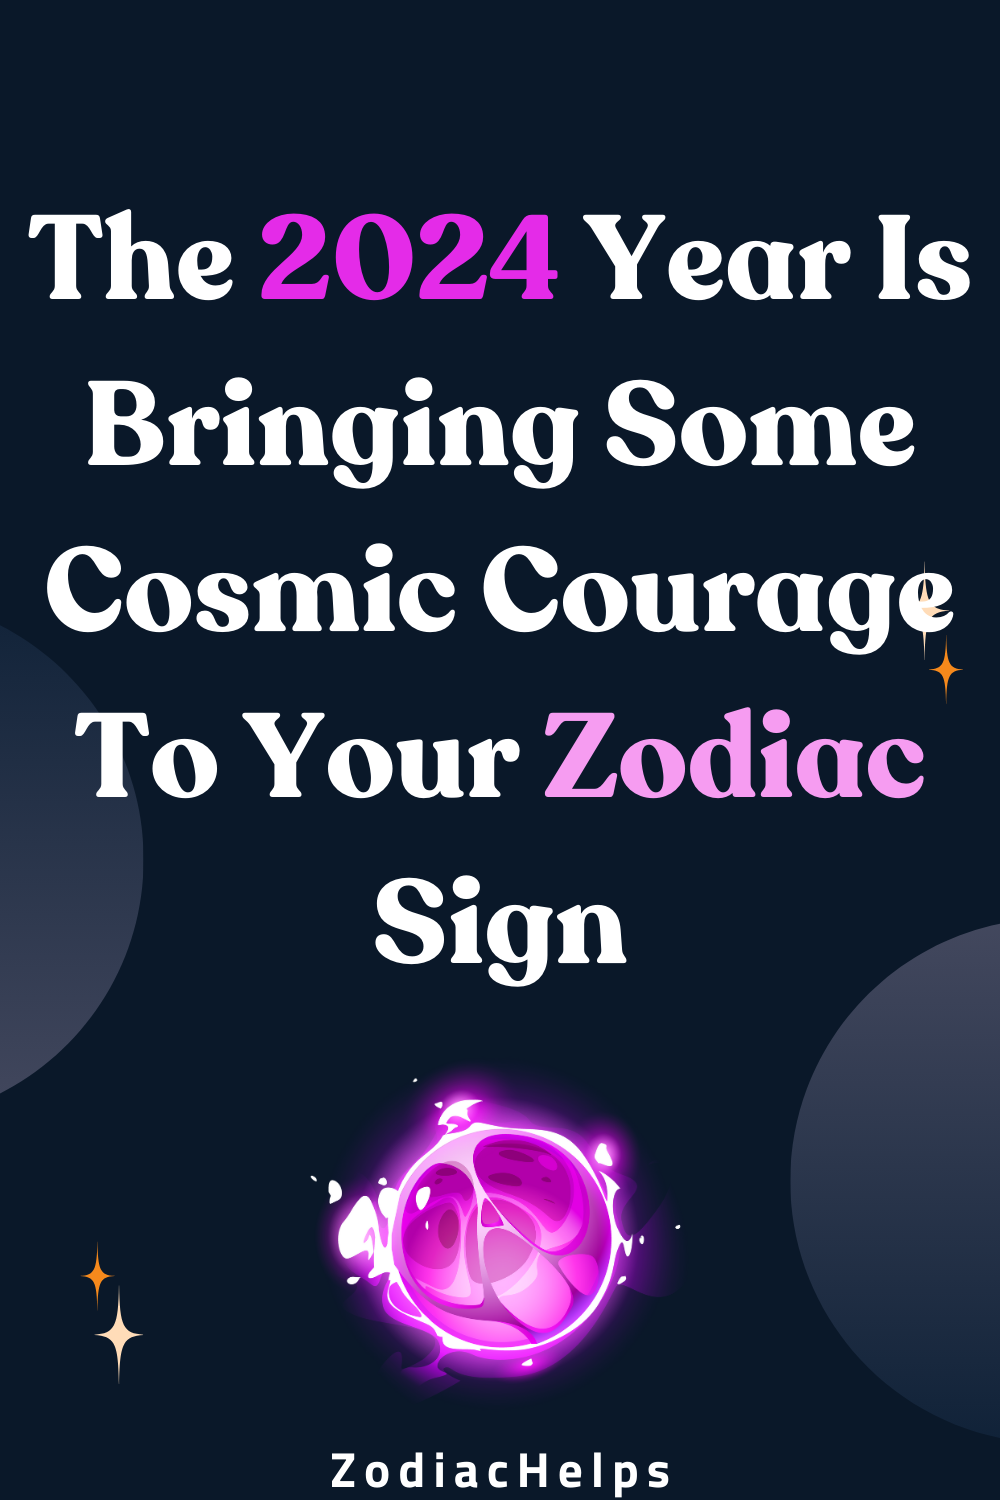 The 2024 Year Is Bringing Some Cosmic Courage To Your Zodiac Sign